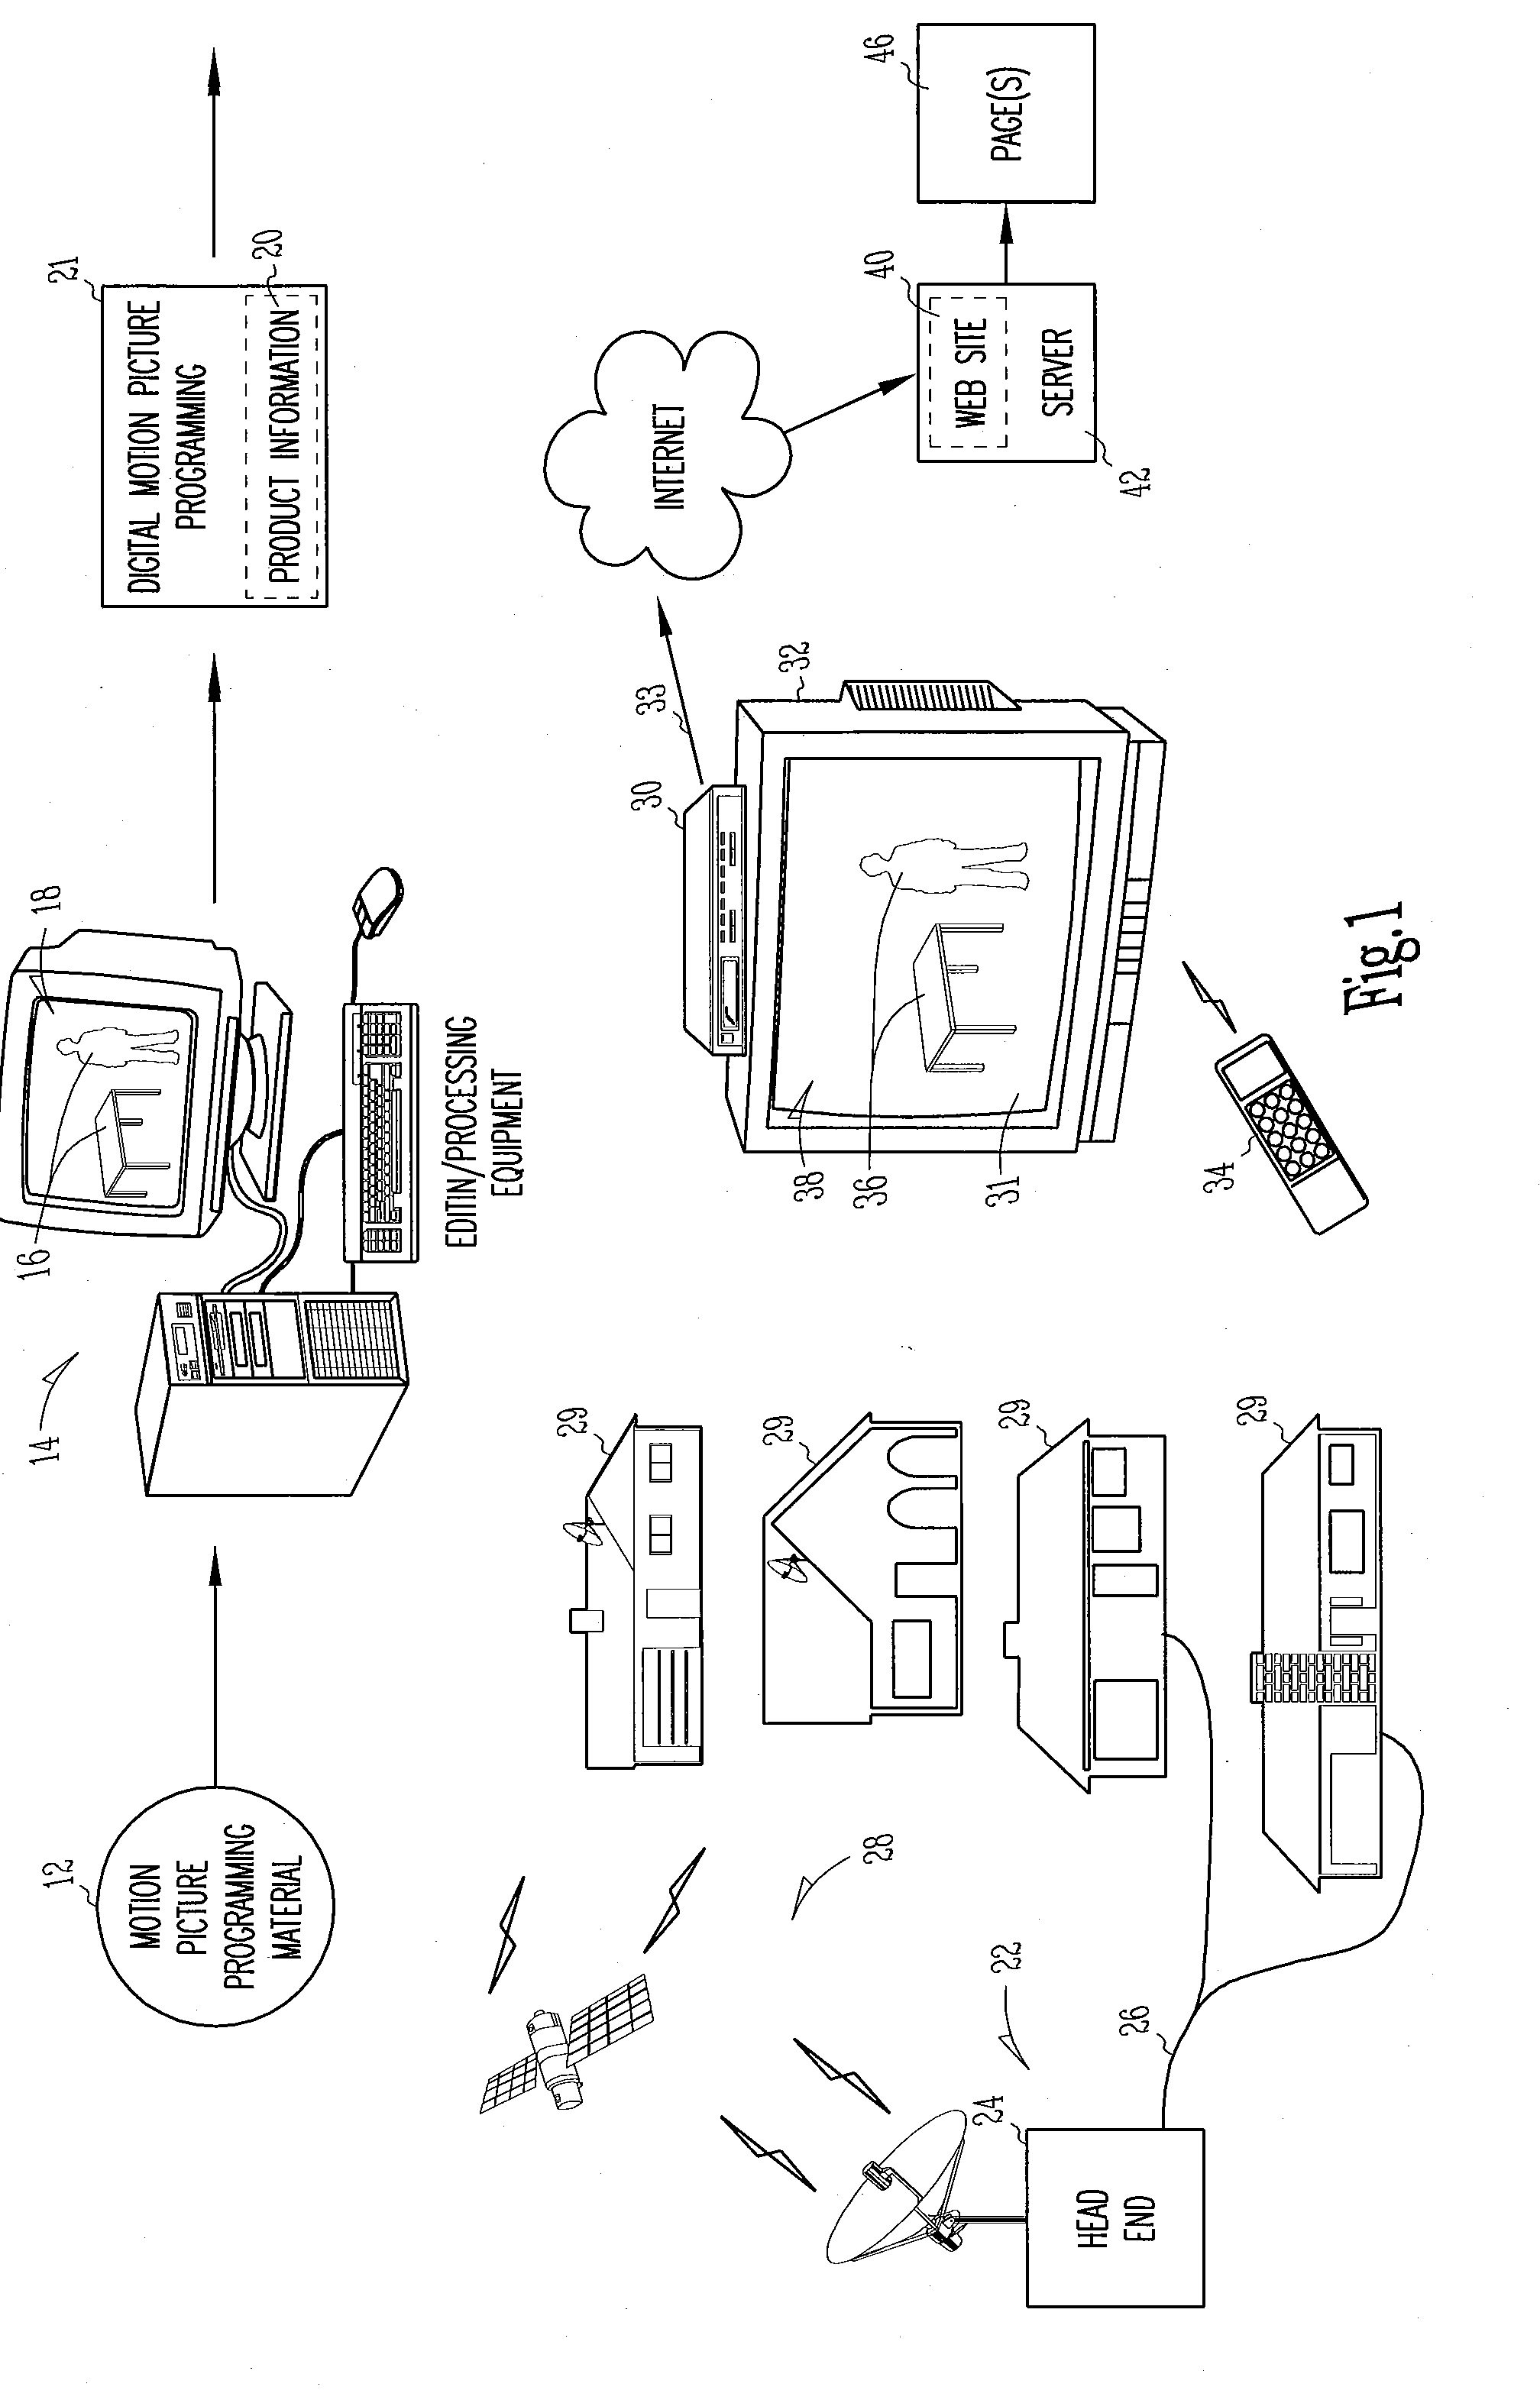 Method and apparatus for displaying information about a beauty product element